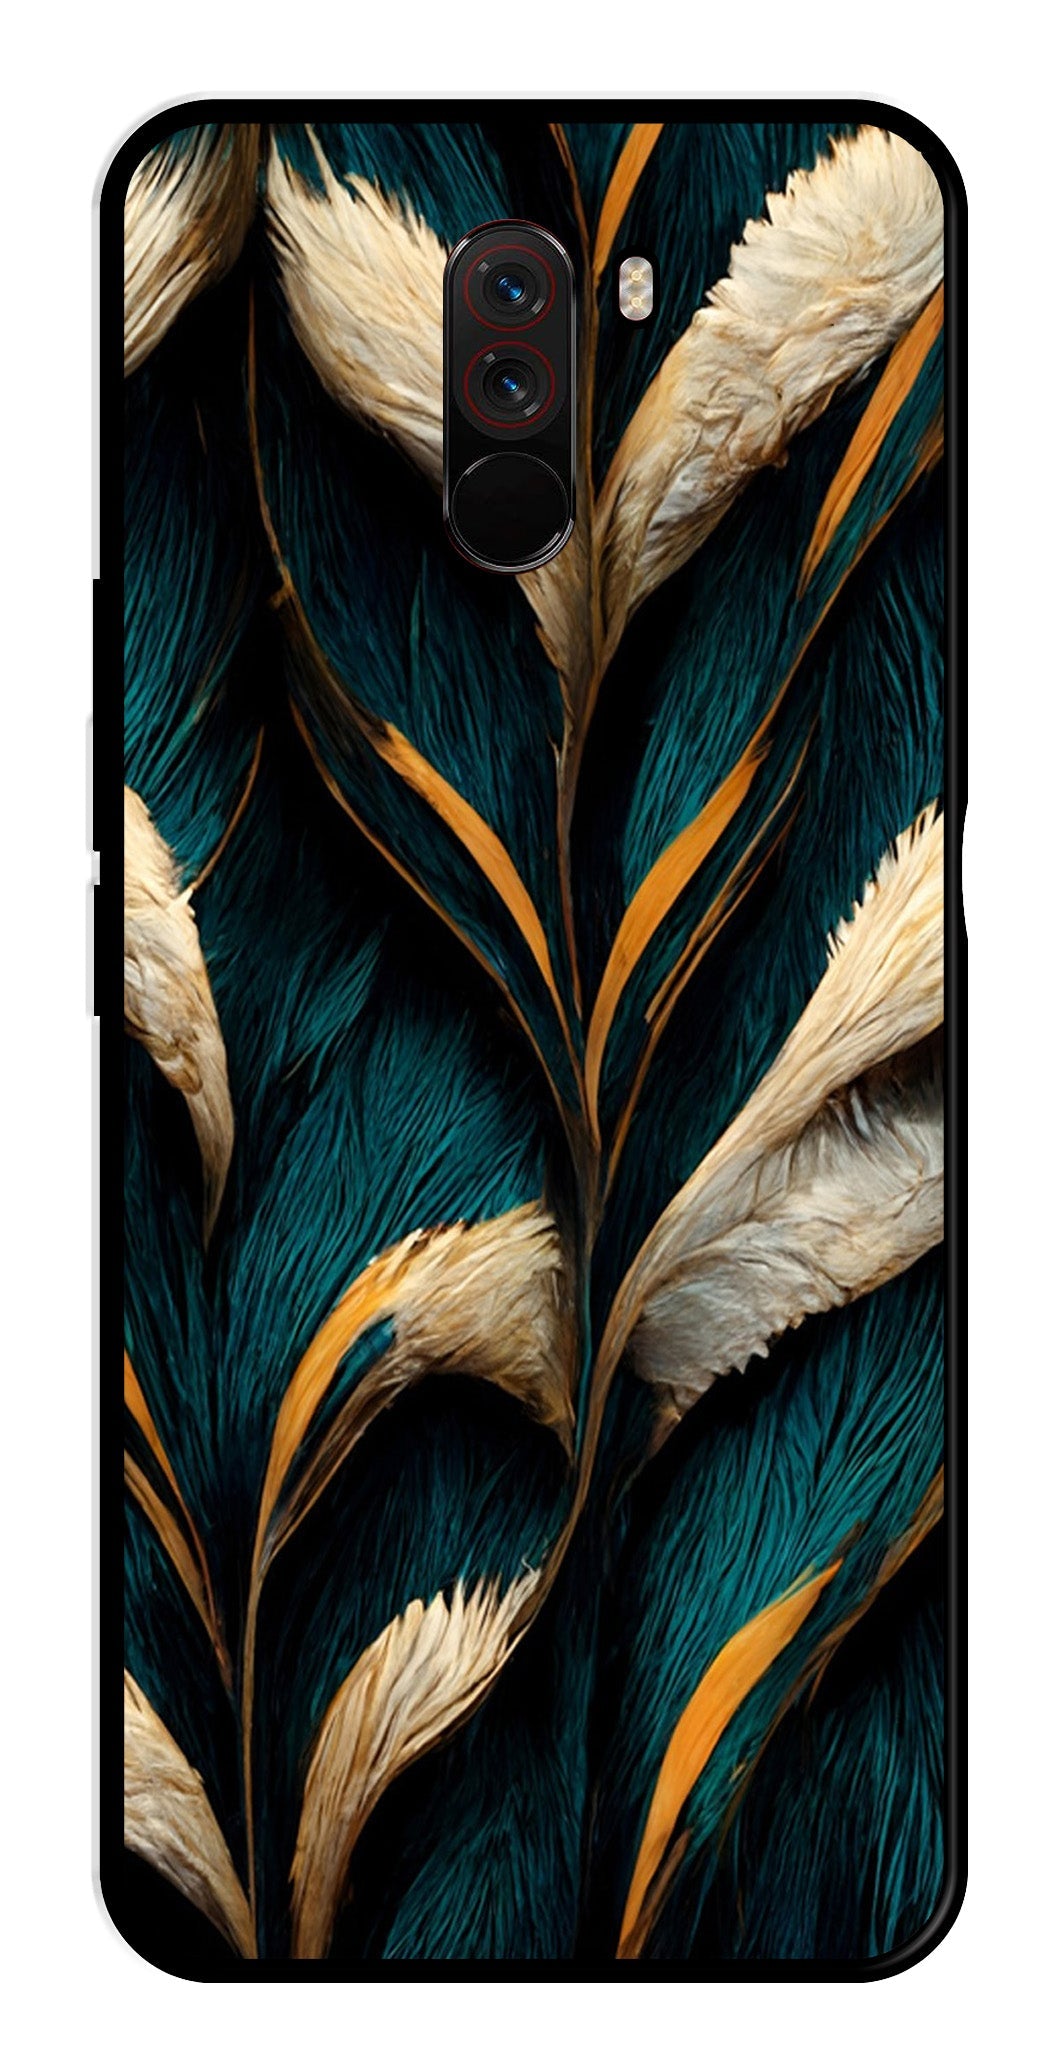 Feathers Metal Mobile Case for Poco F1   (Design No -30)